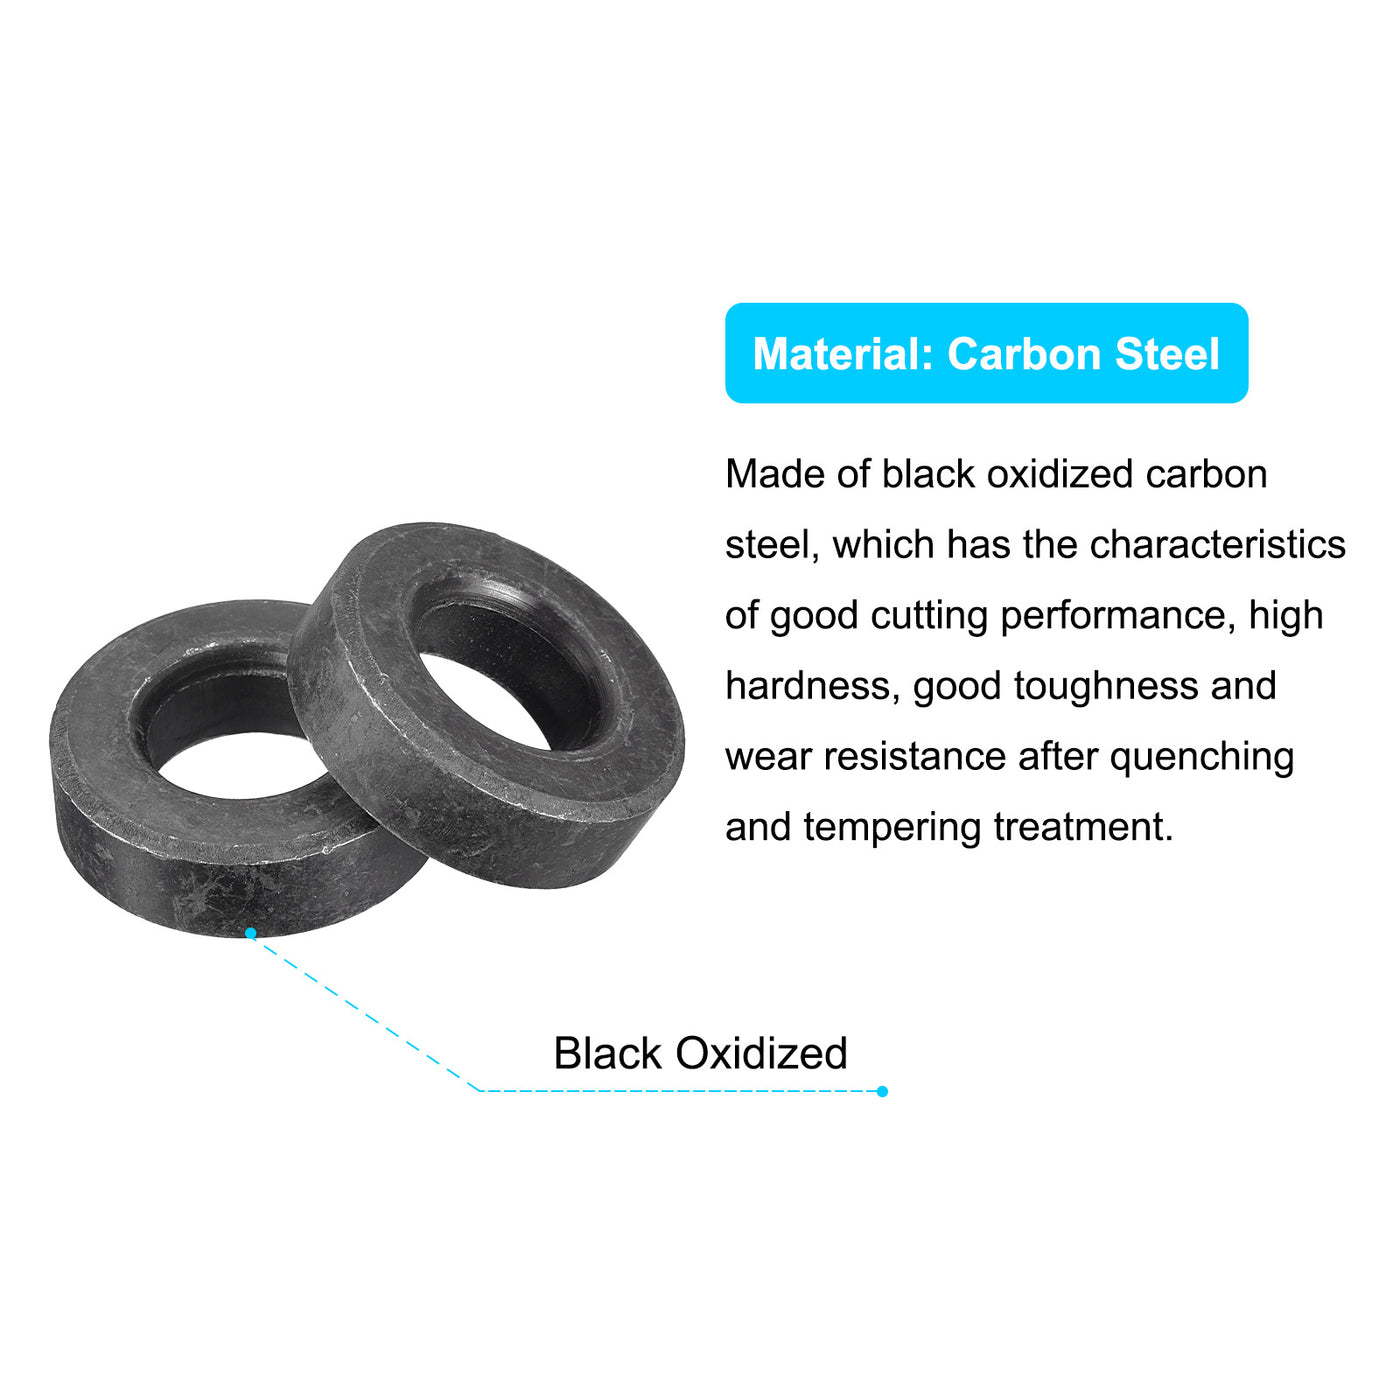 uxcell Uxcell M14 Carbon Steel Flat Washer 5pcs 15x30x9.5mm Grade 8.8 Alloy Steel Fasteners